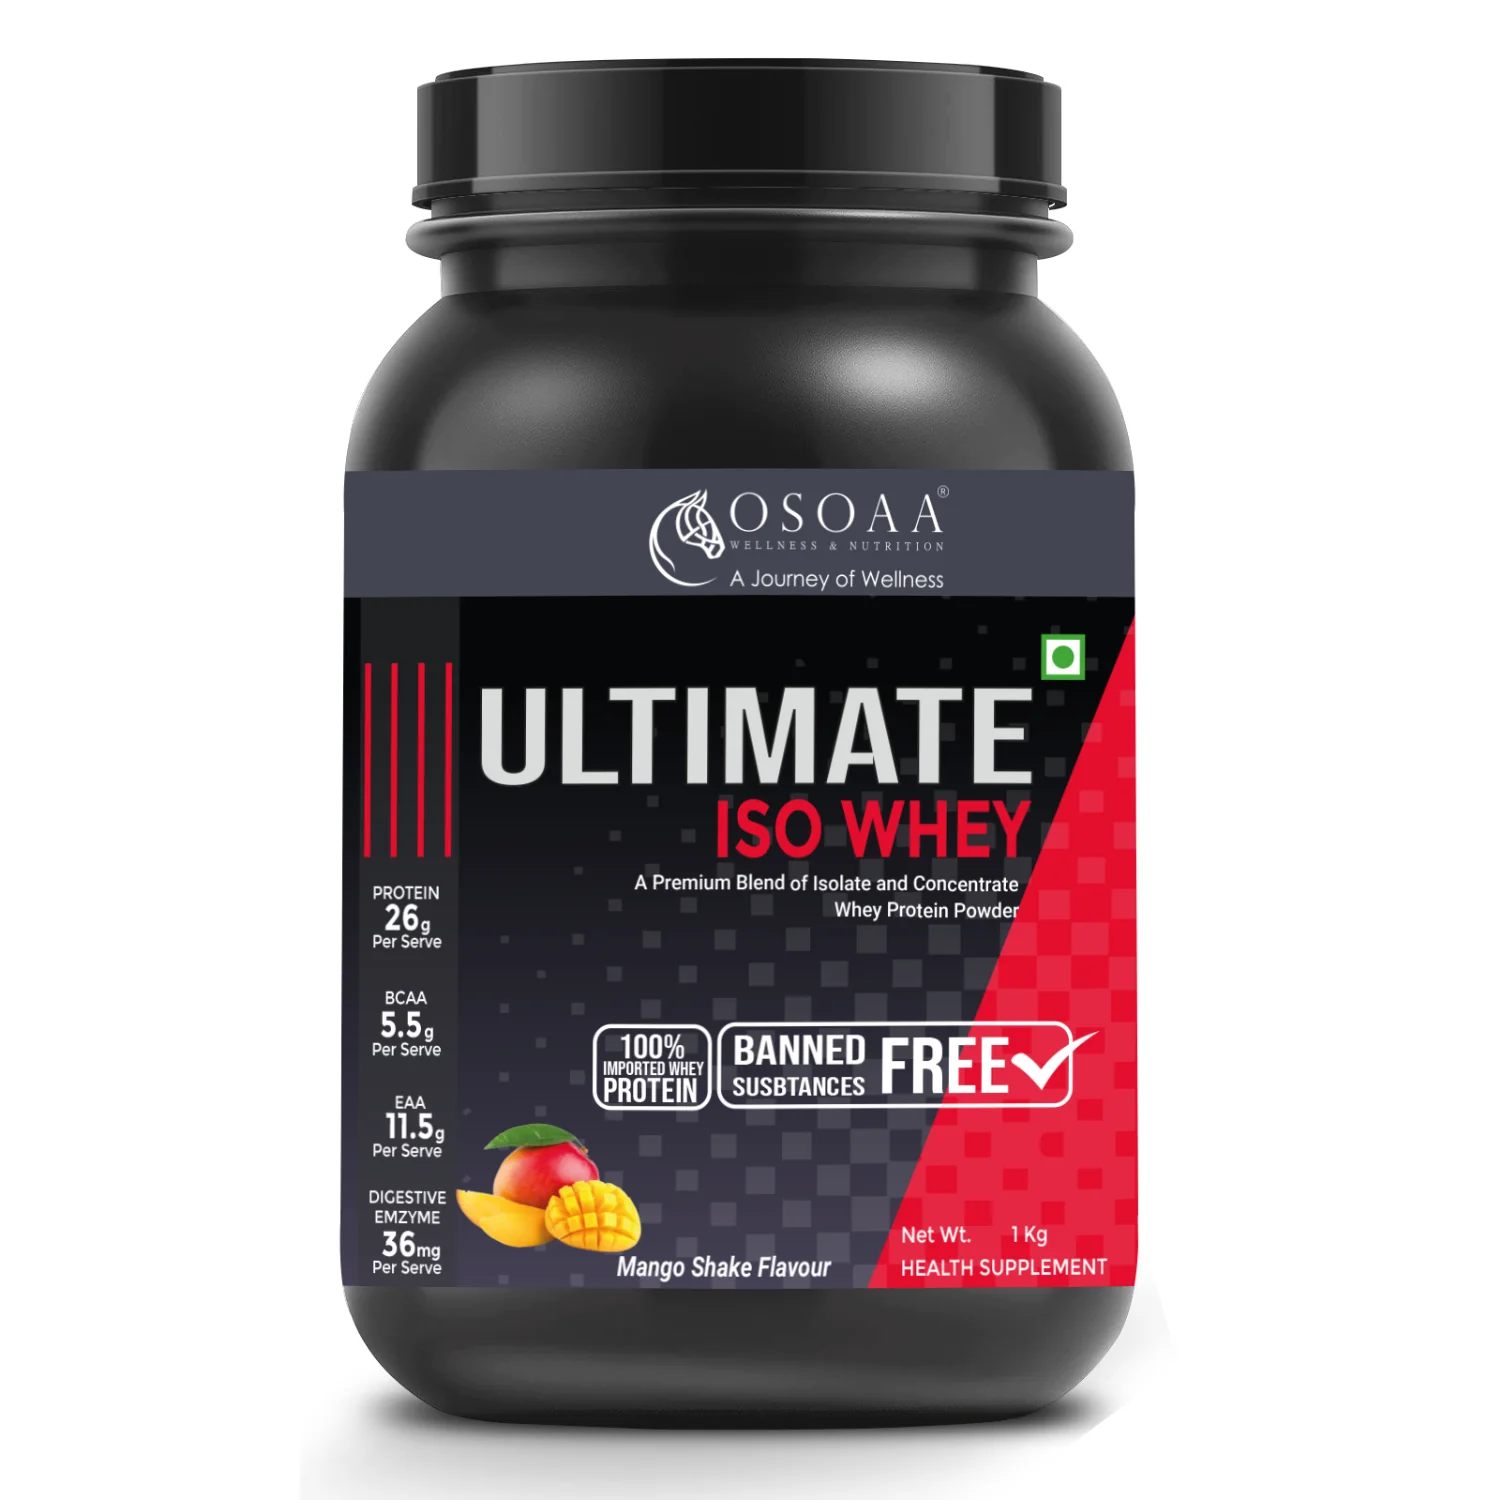 OSOAA Whey Ultimate Iso Whey | 26g Prote...